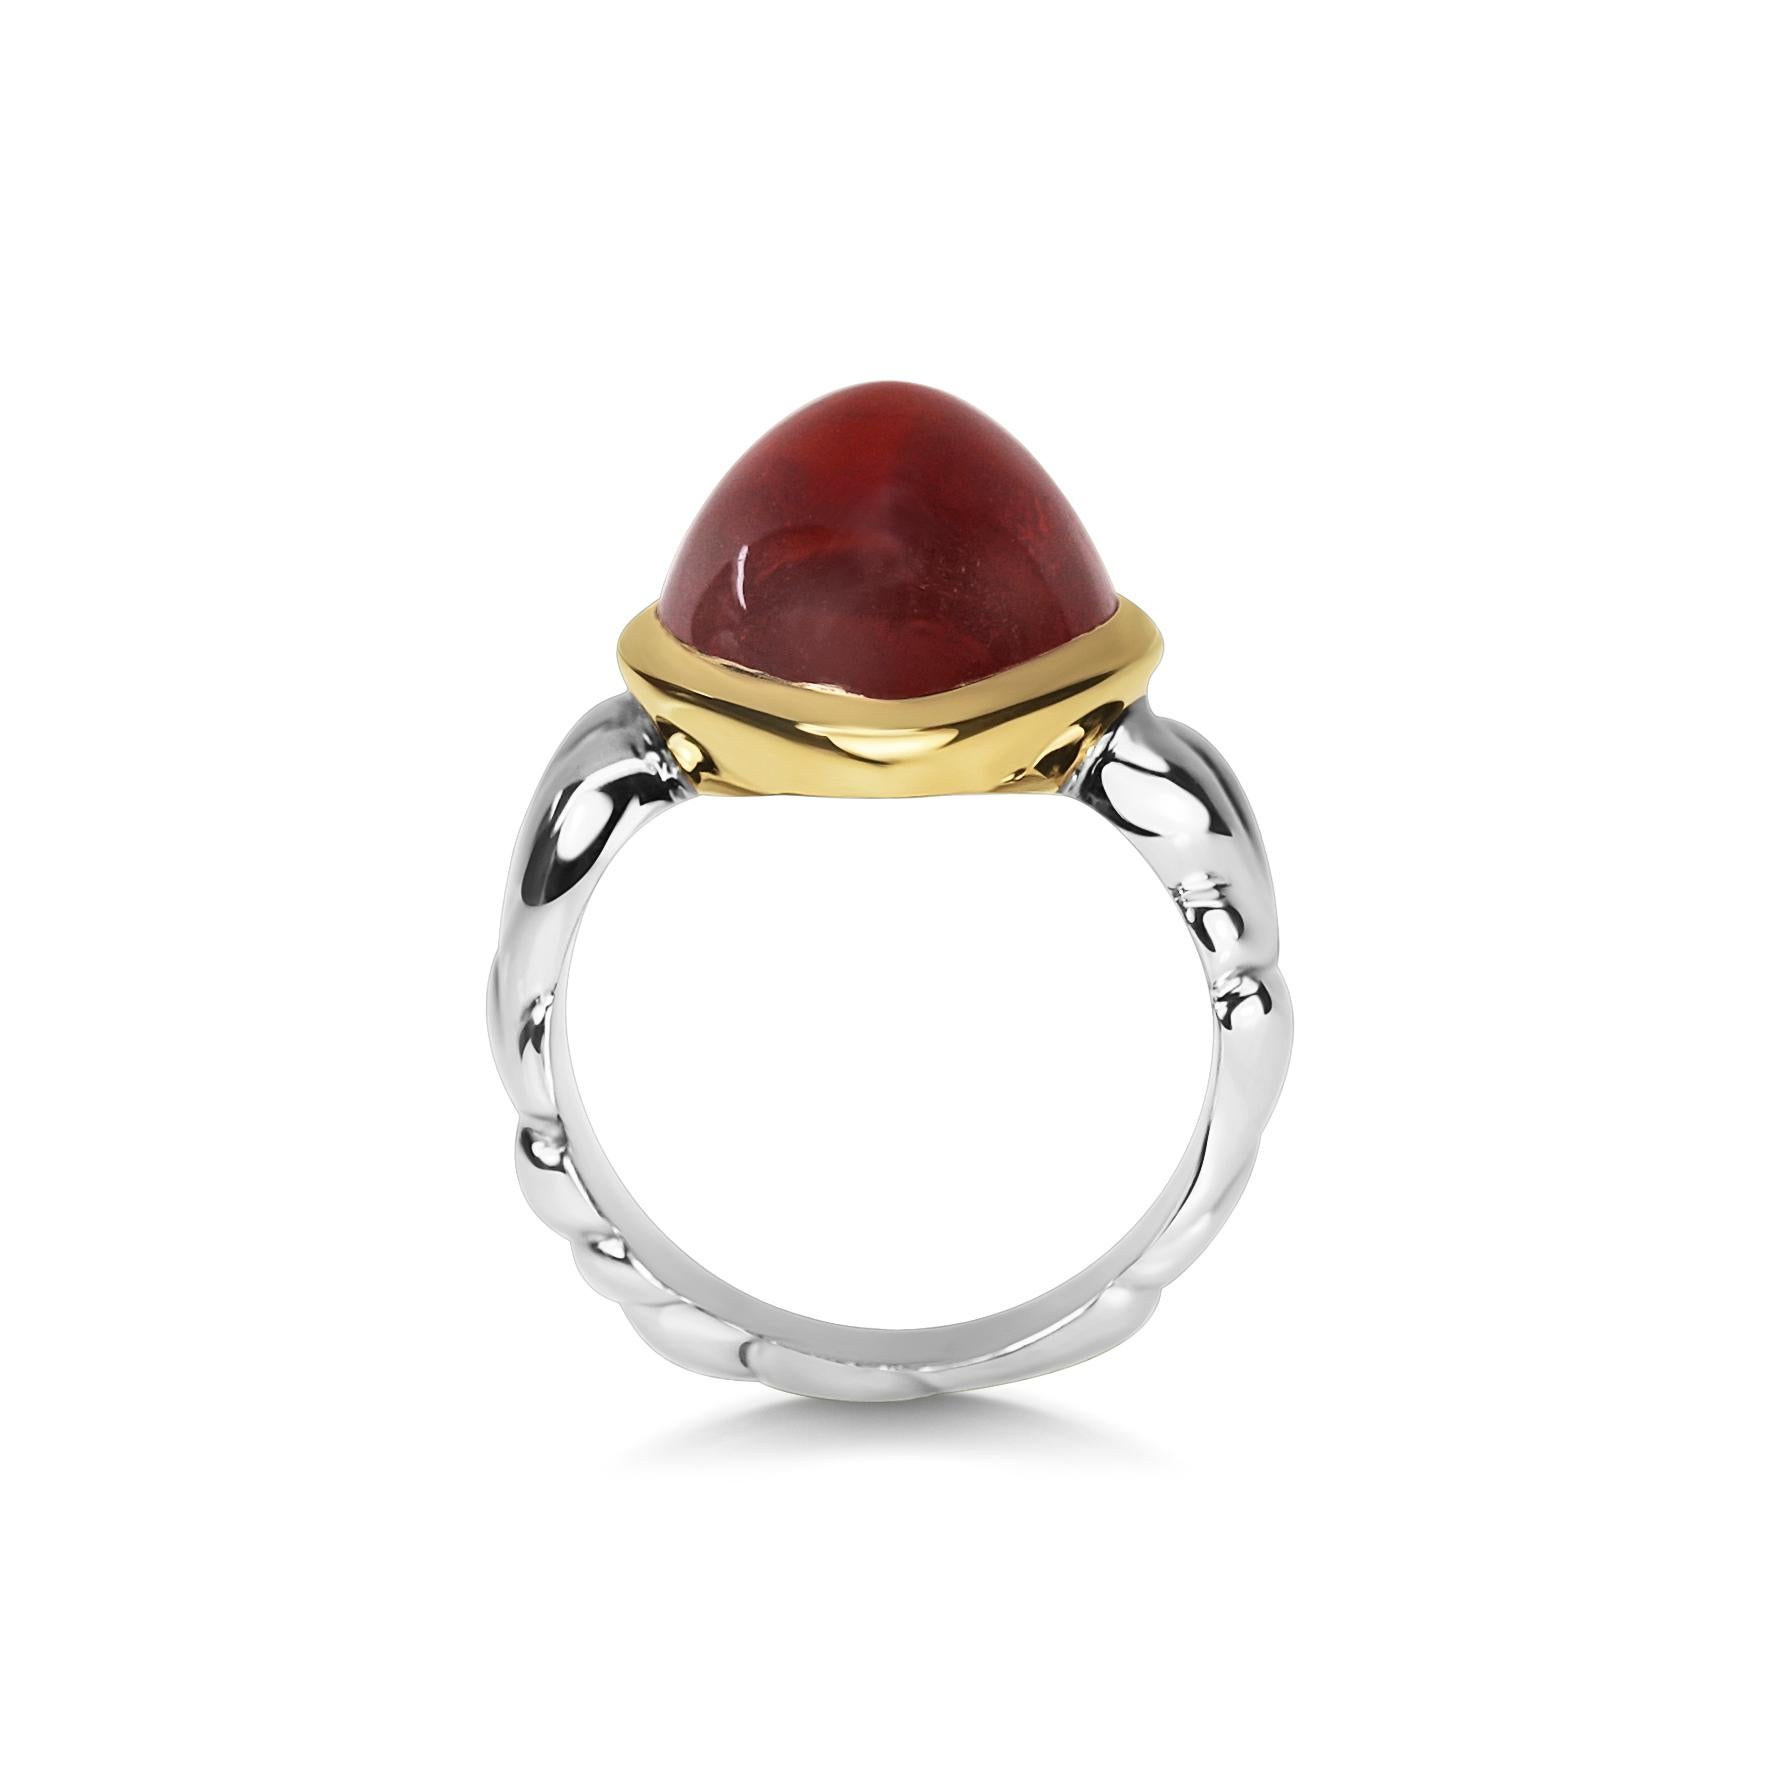 Large spessartite garnet cabachon stone with a high peaked top. The gemstone is set in 18k yellow gold, and held in a 18k white gold carved band. 

The spessartite garnet has a wonderfully warm and rich autumn tones - orange, brown and red. It has